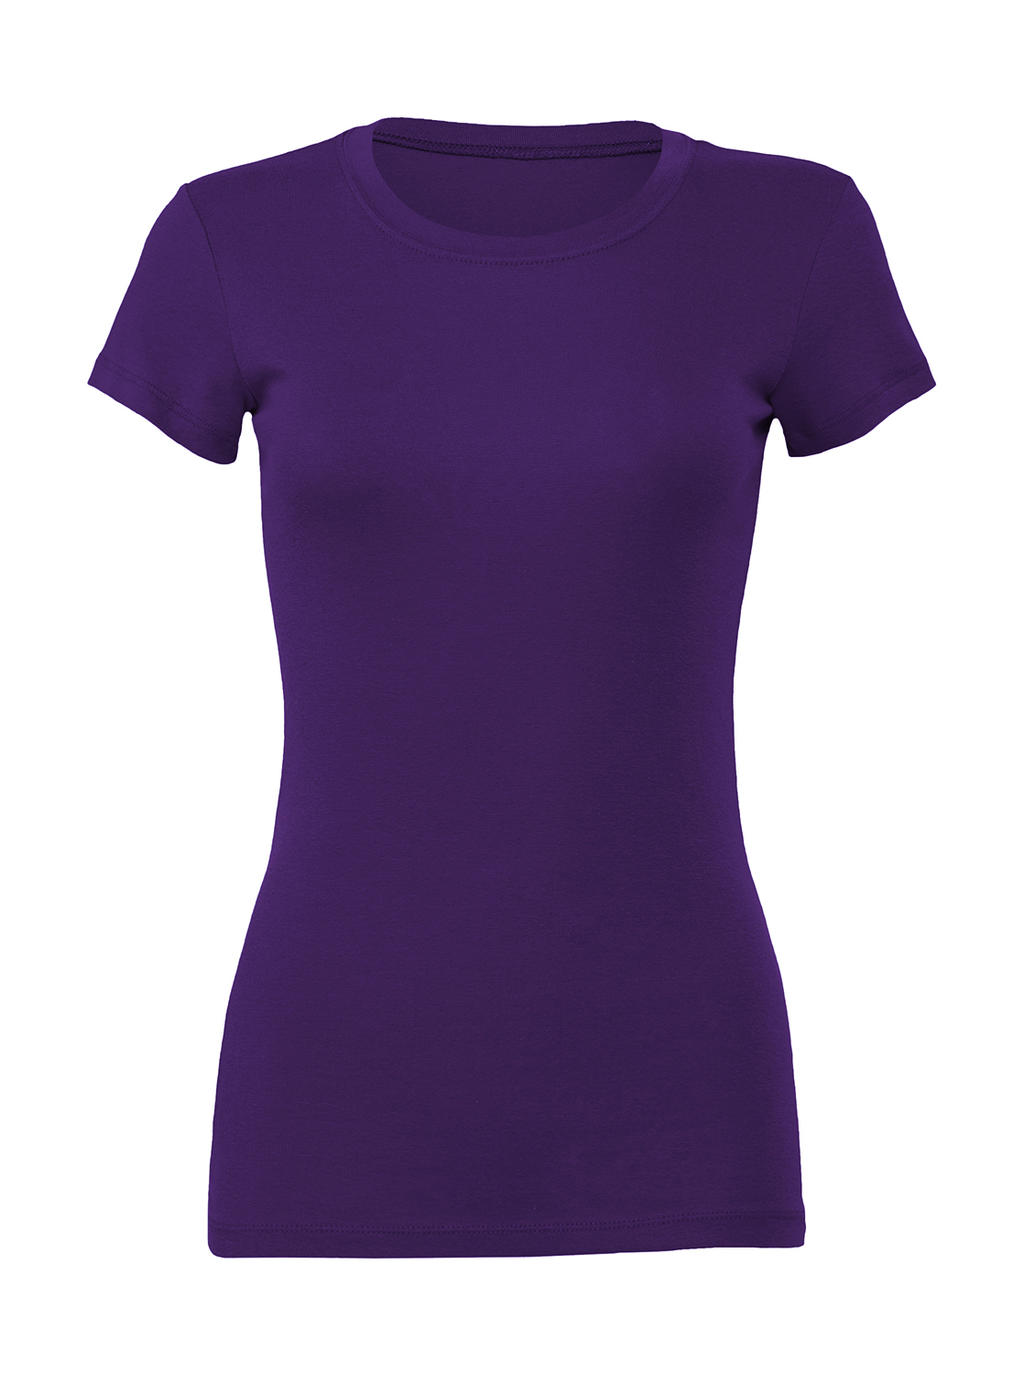  The Favorite T-Shirt in Farbe Team Purple